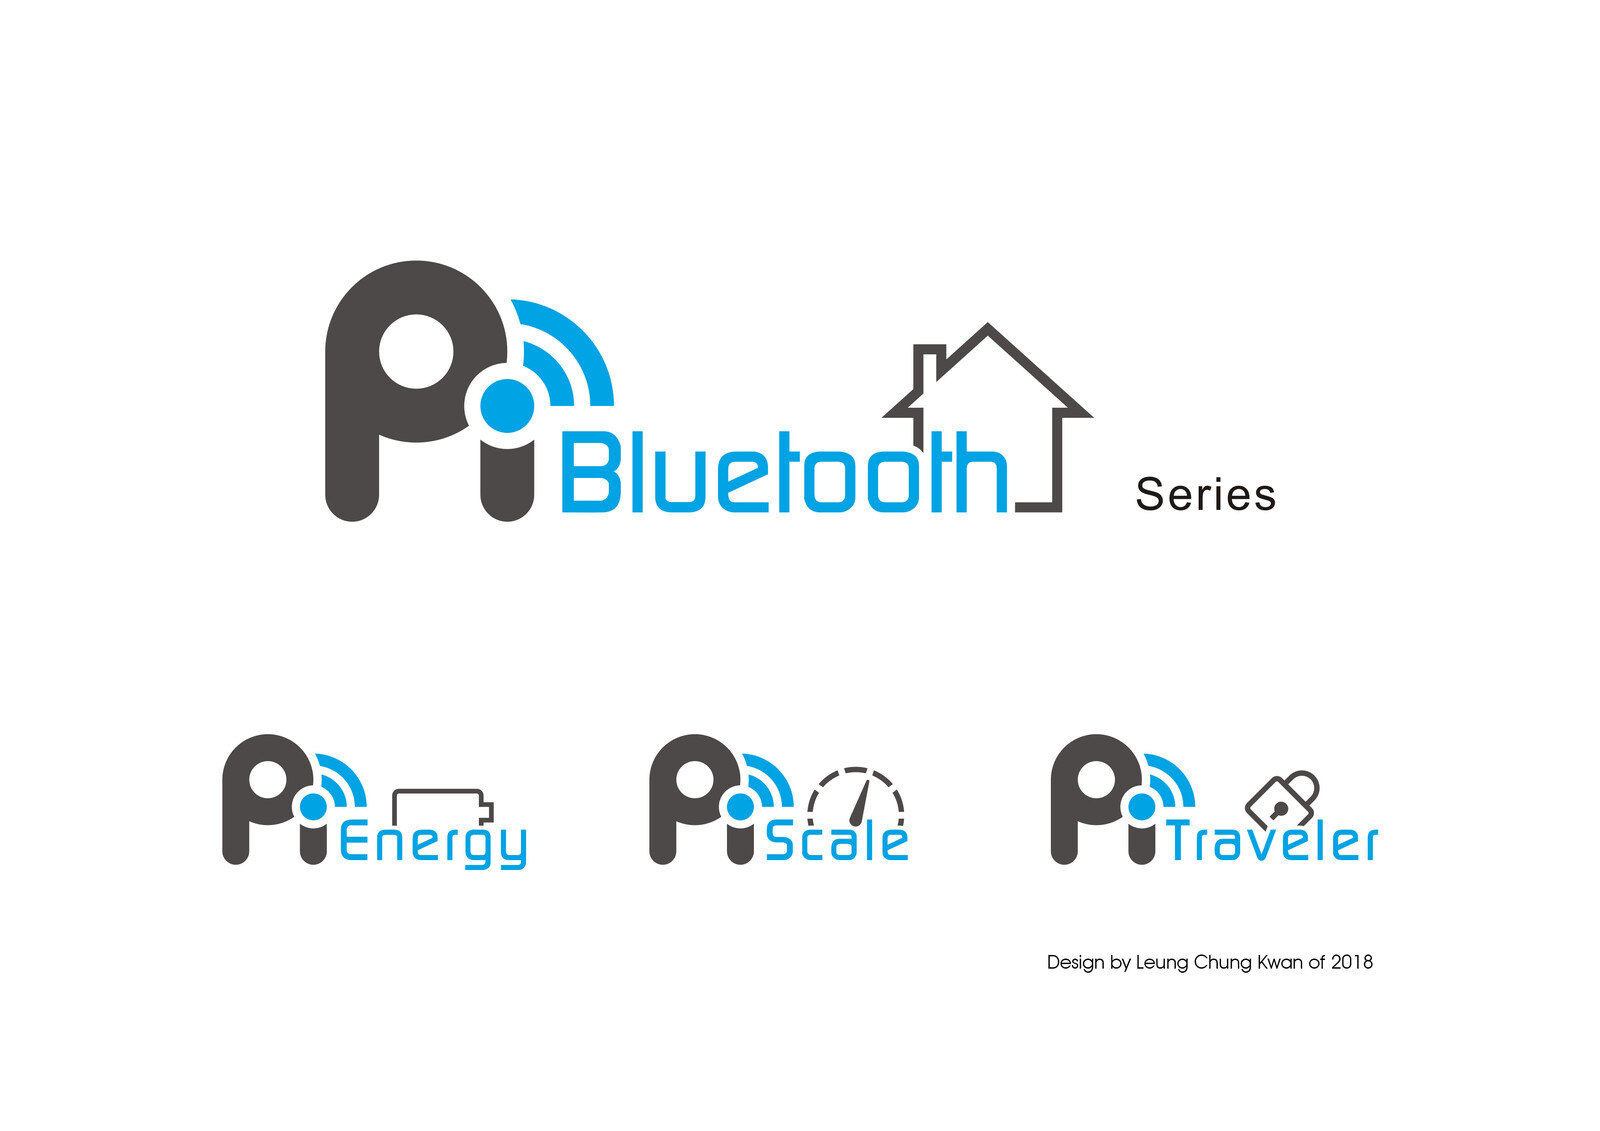 💎 Product Logo | Design by Leung Chung Kwan on 2018 💎
App Name︰Pibluetooth Series | Client︰Piot Technology Limited